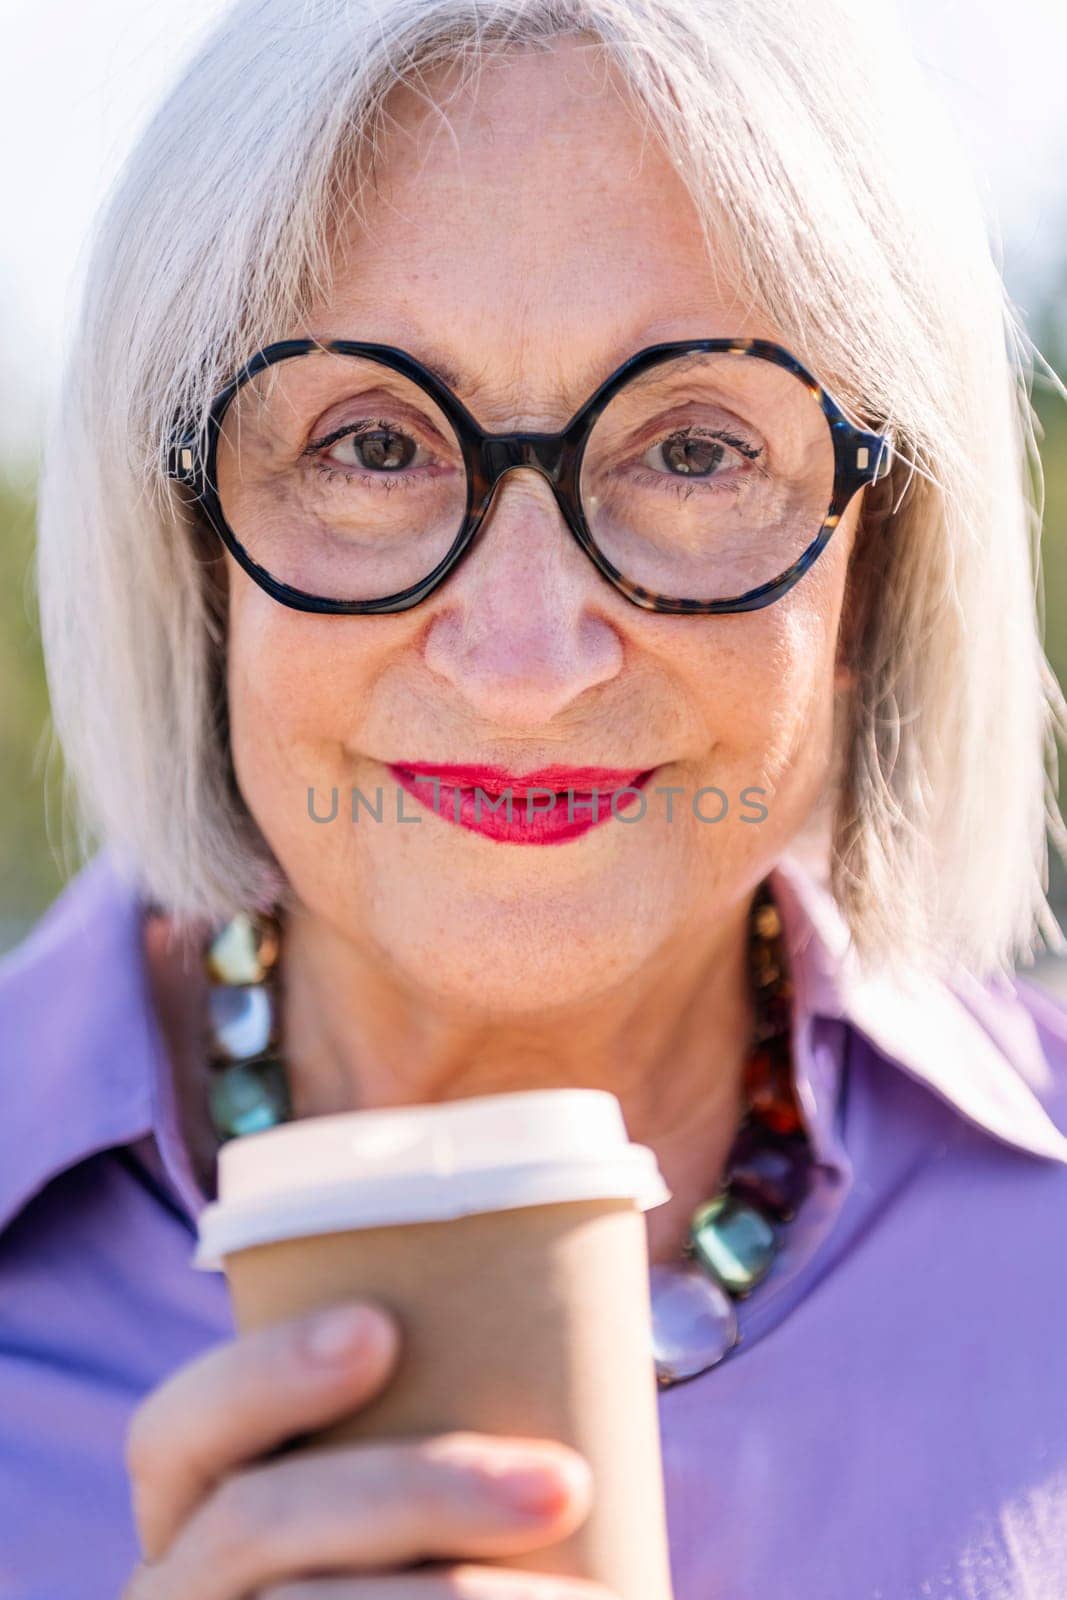 smiling senior woman with a takeaway coffee by raulmelldo